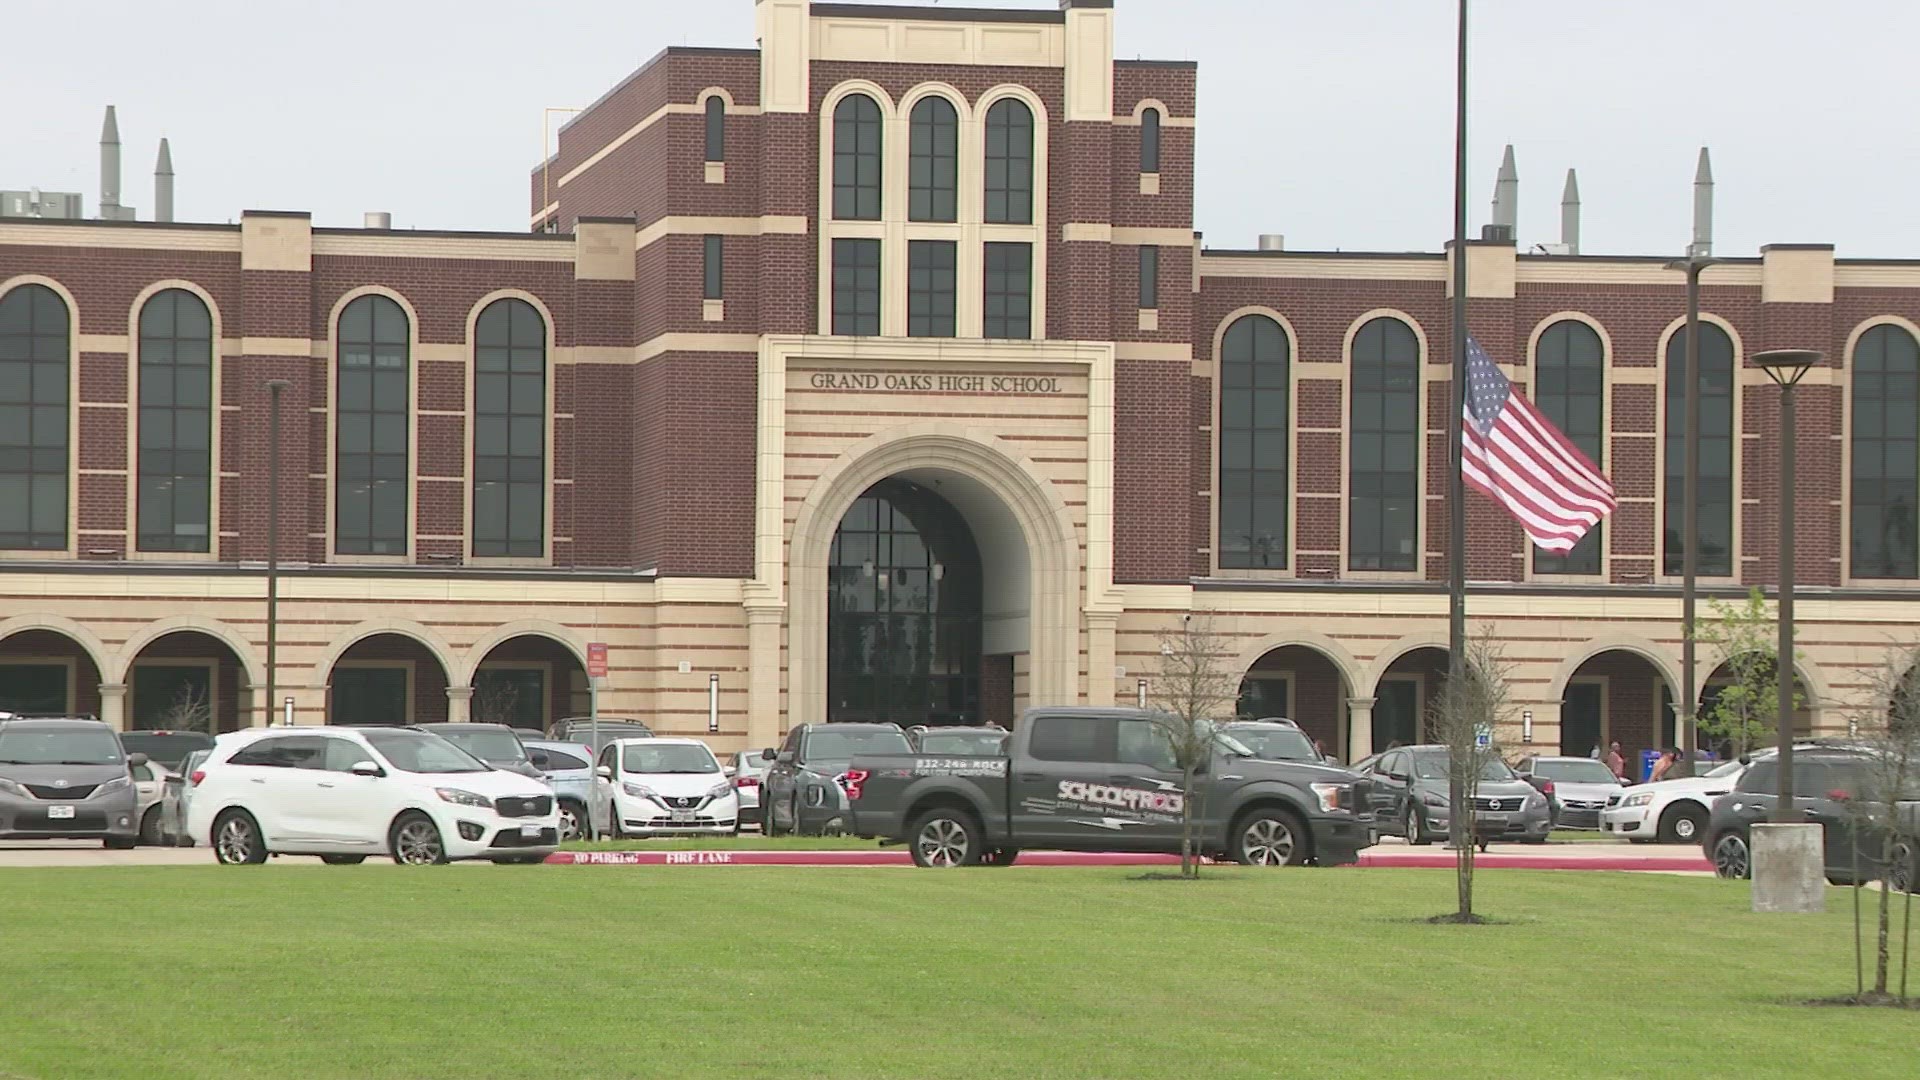 Conroe ISD police said they found a student inside the school in possession of a Ruger 380 pistol.